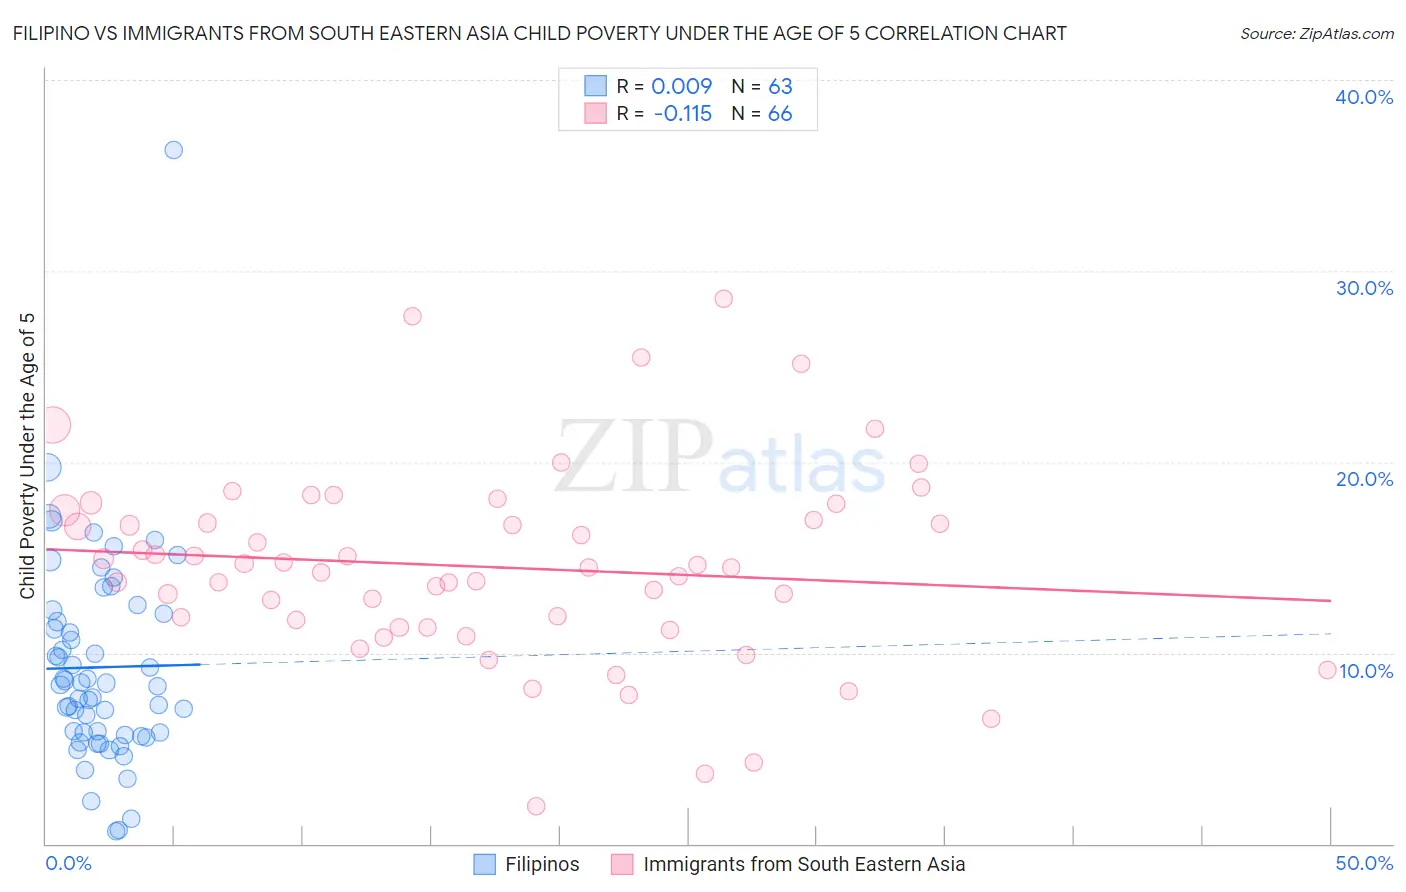 Filipino vs Immigrants from South Eastern Asia Child Poverty Under the Age of 5